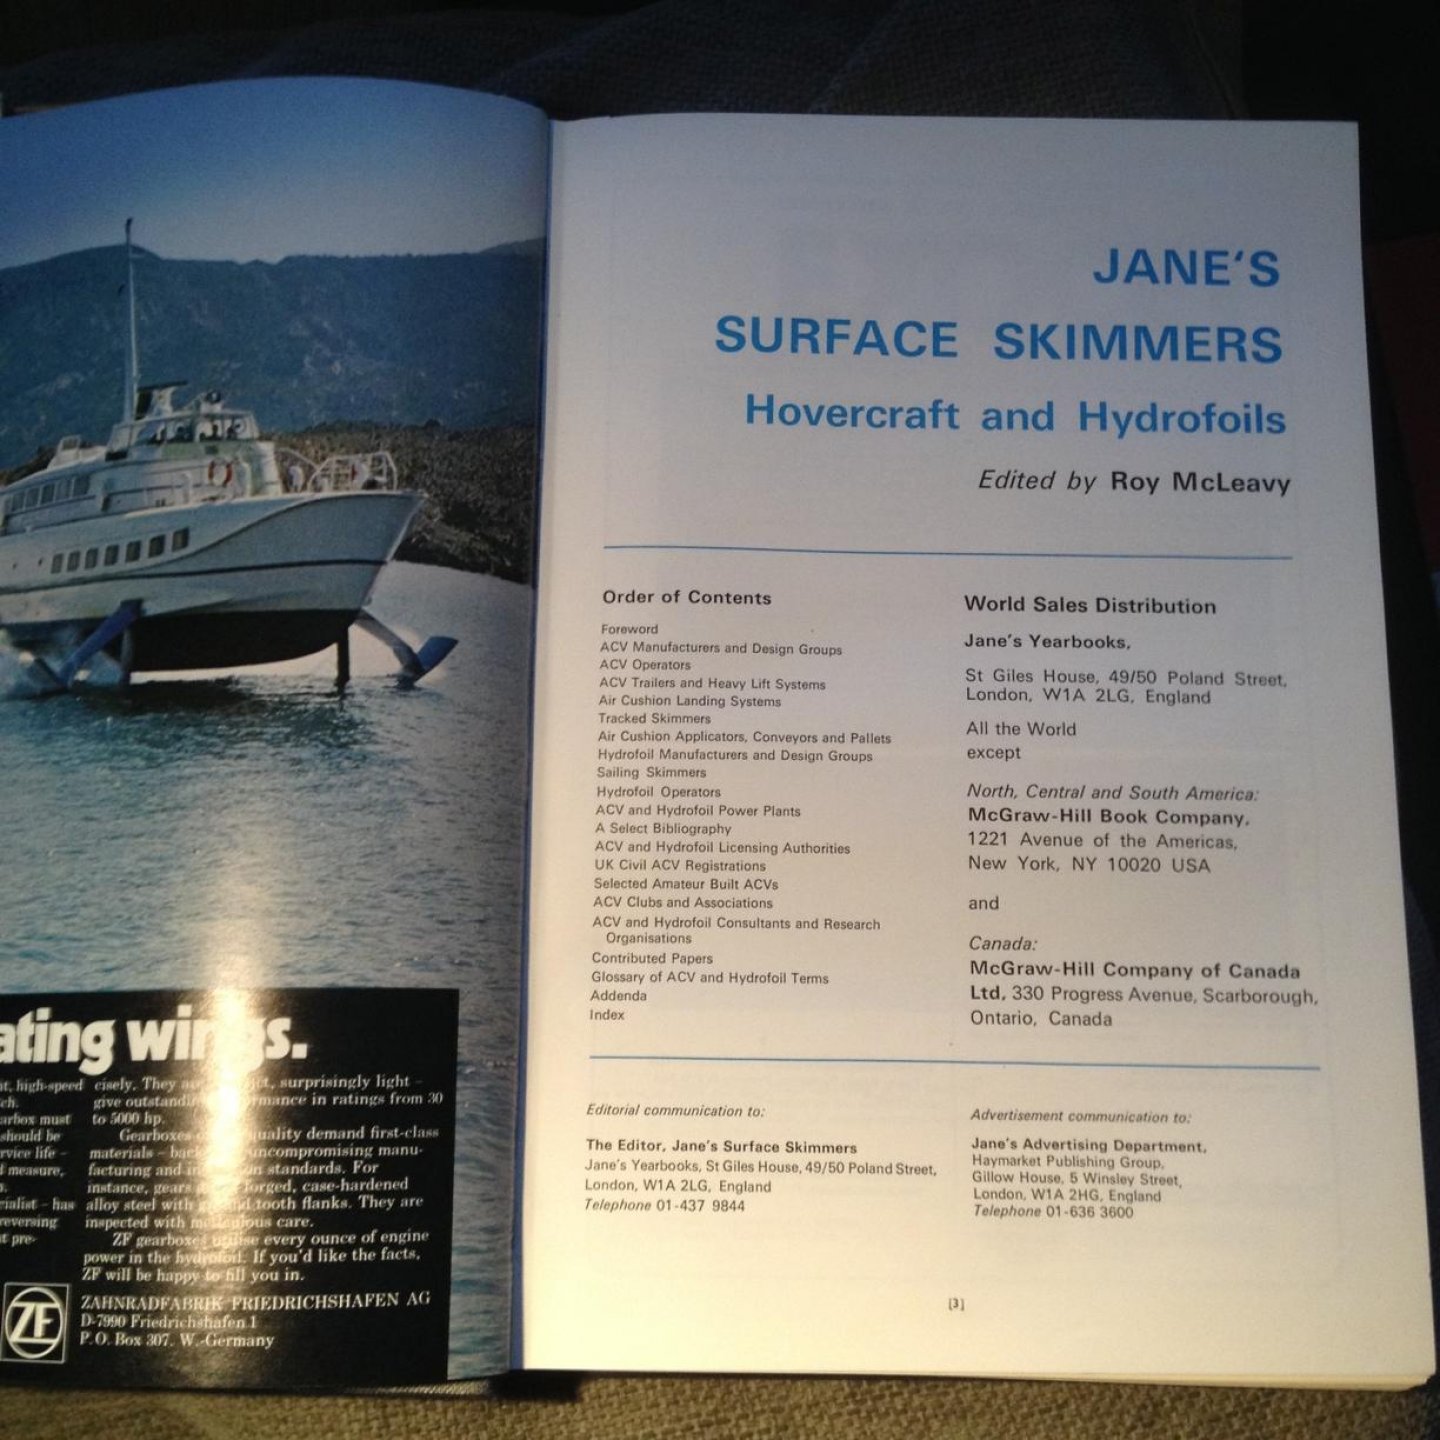 ROY McLEAVY - JANE'S SURFACE SKIMMERS: HOVERCRAFT & HYDROFOILS 1973-74 by ROY McLEAVY/1973